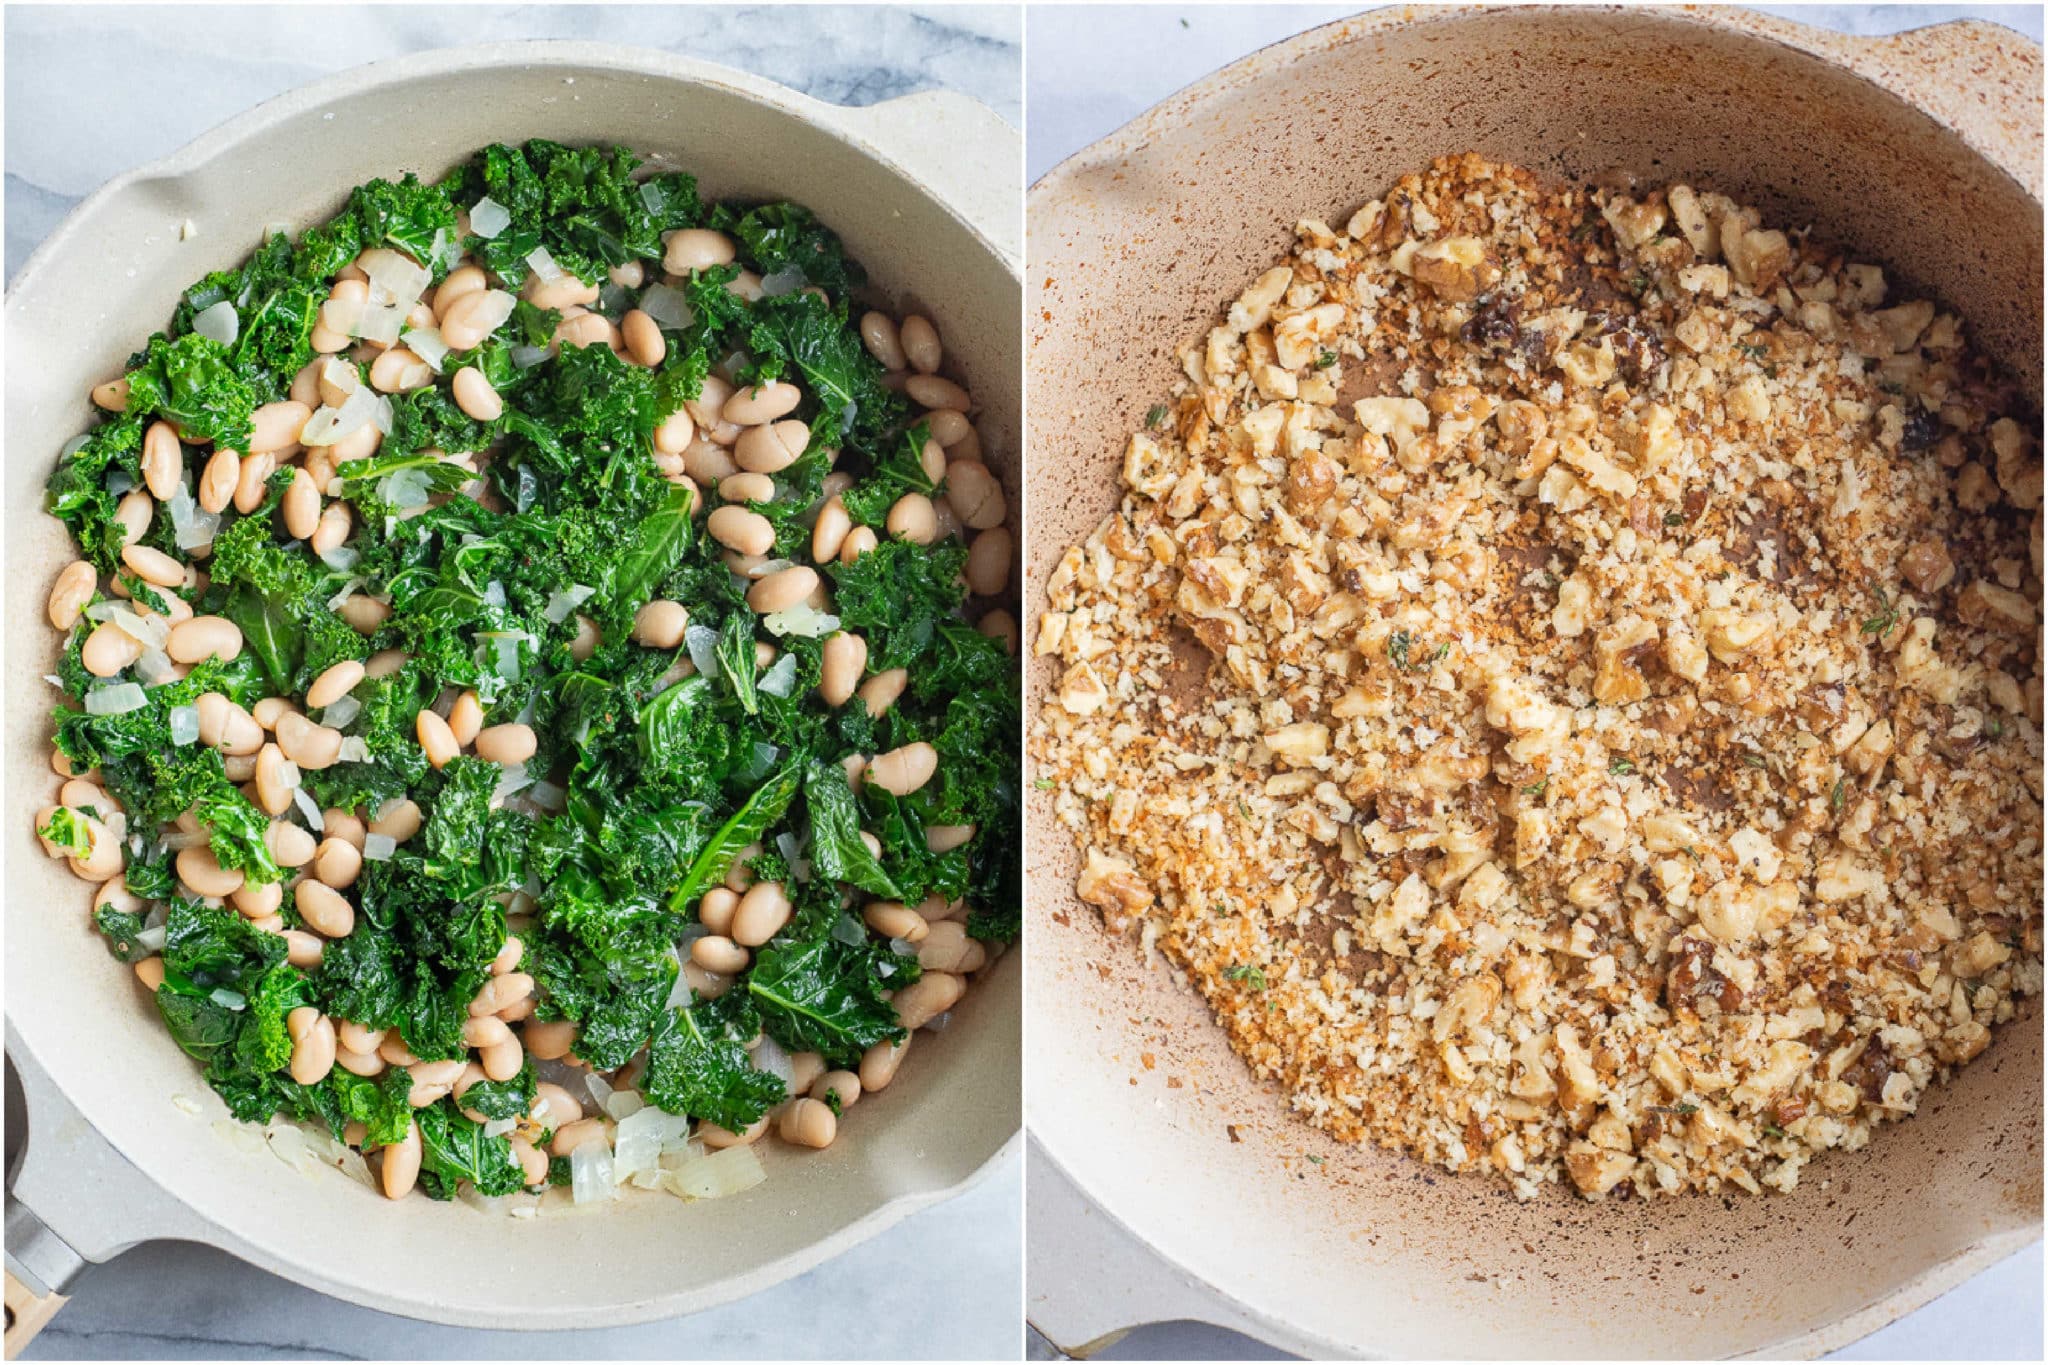 showing how to make white beans and kale as well as the crispy walnut panko topping